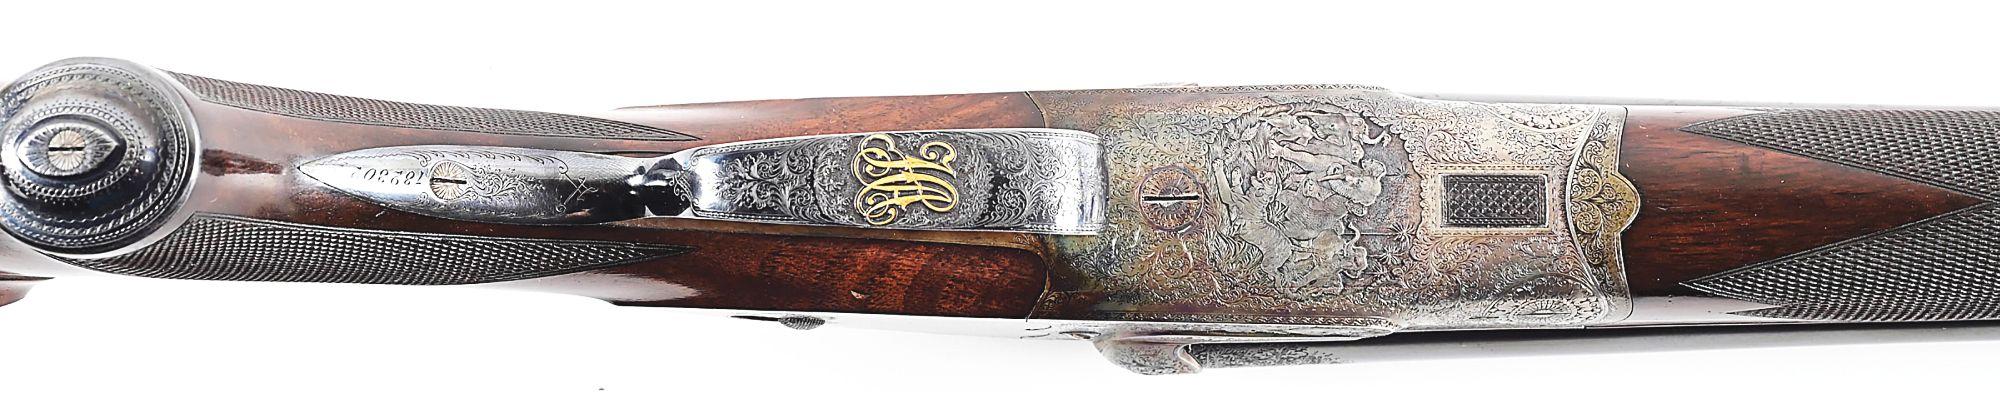 (C) J.P. SAUER 10.75X68 DOUBLE RIFLE, RETAILED BY VOELKER, BUENOS AIRES, AND ENGRAVED WITH SAFARI SC